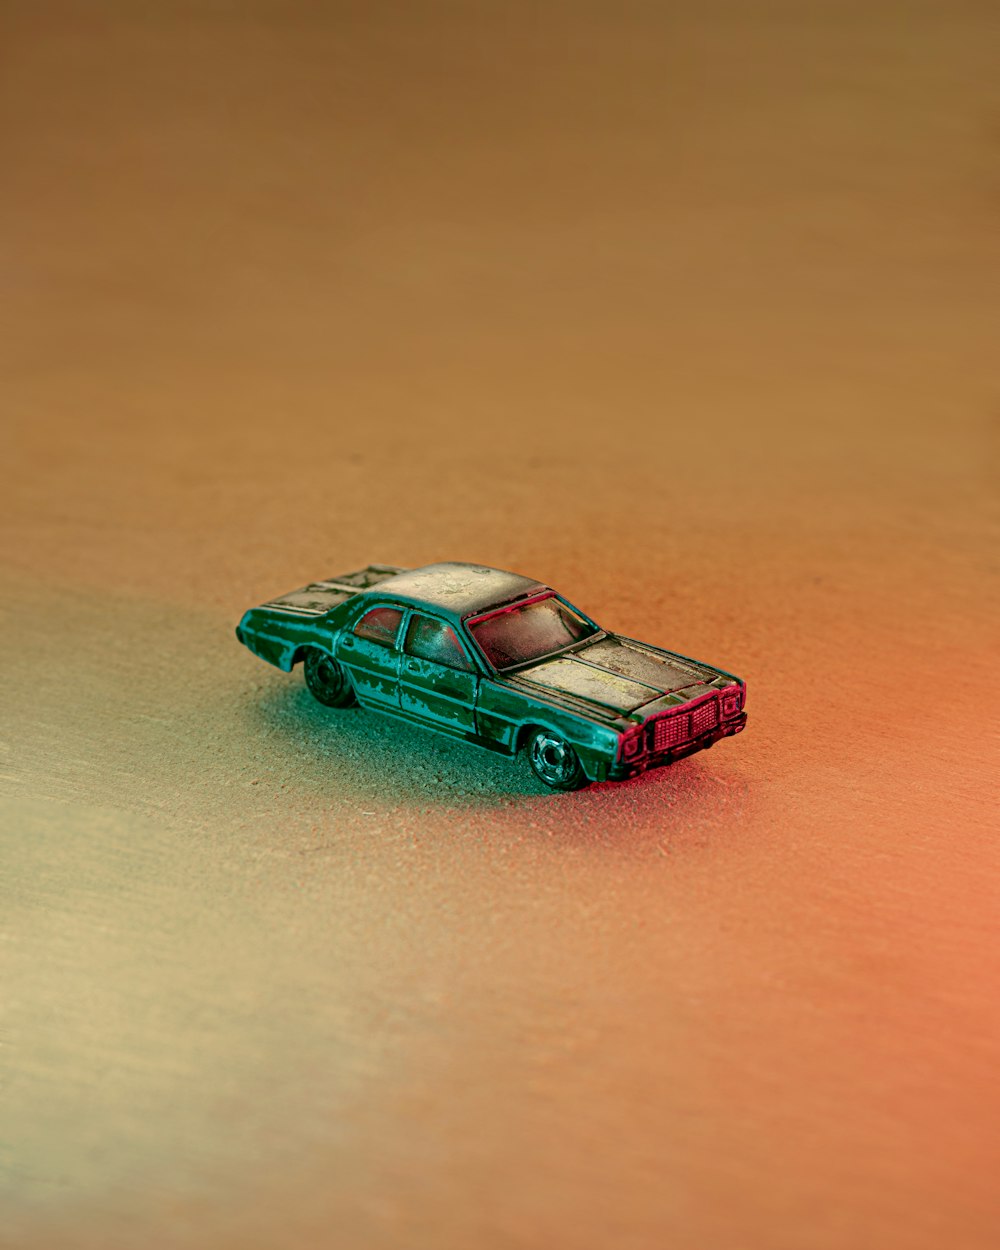 teal car scale model on brown wooden table